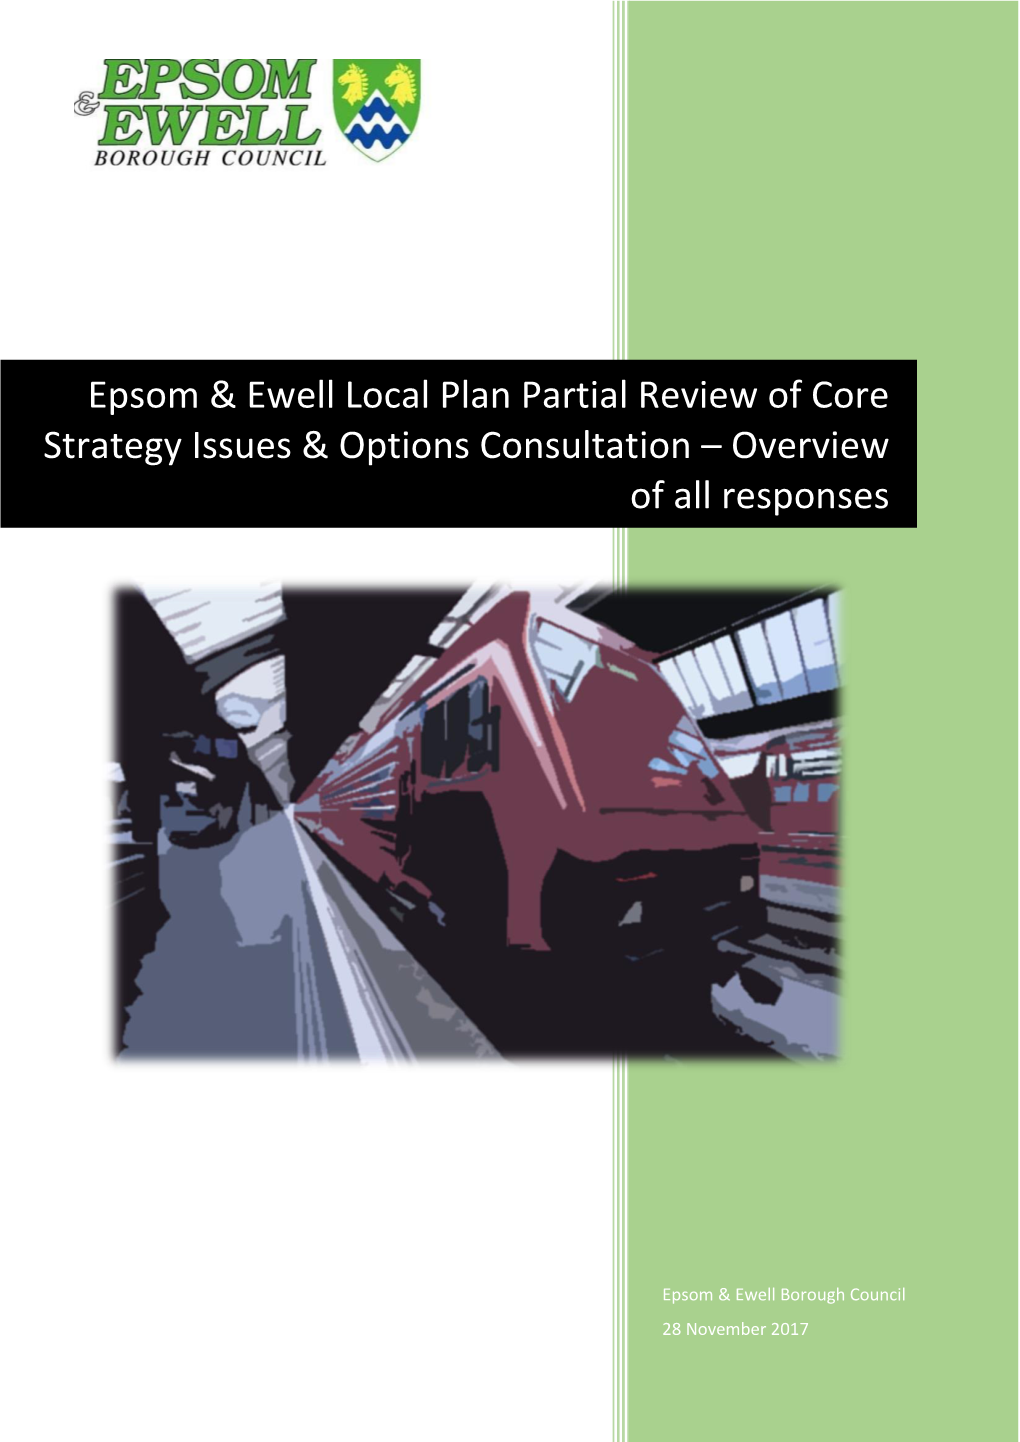 Epsom & Ewell Local Plan Partial Review of Core Strategy Issues